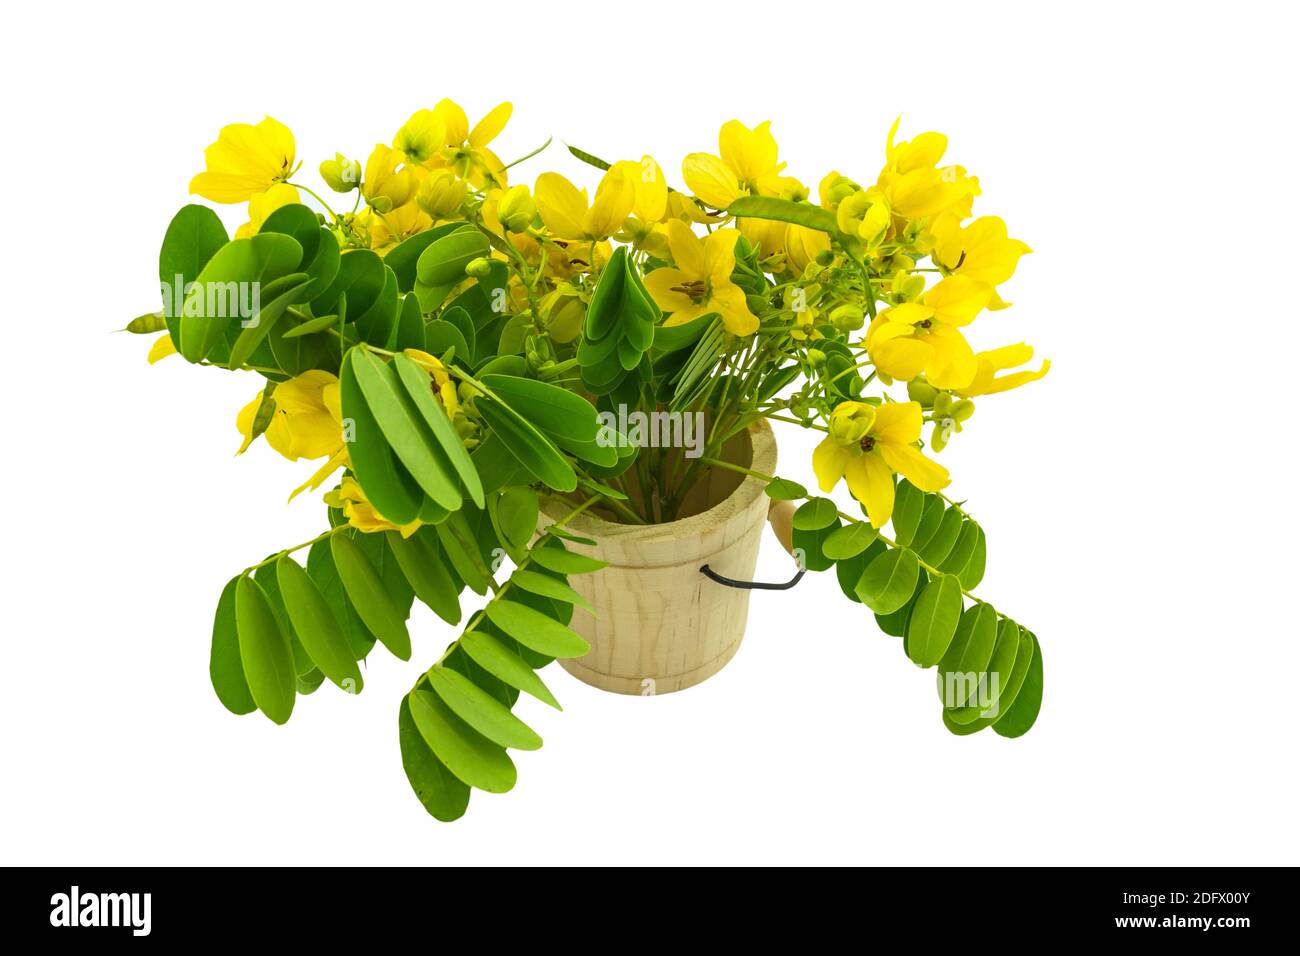 Closed up yellow flower American Cassia or Golden Wonder isolated in wooden csaks on white background.Saved with clipping path. Stock Photo